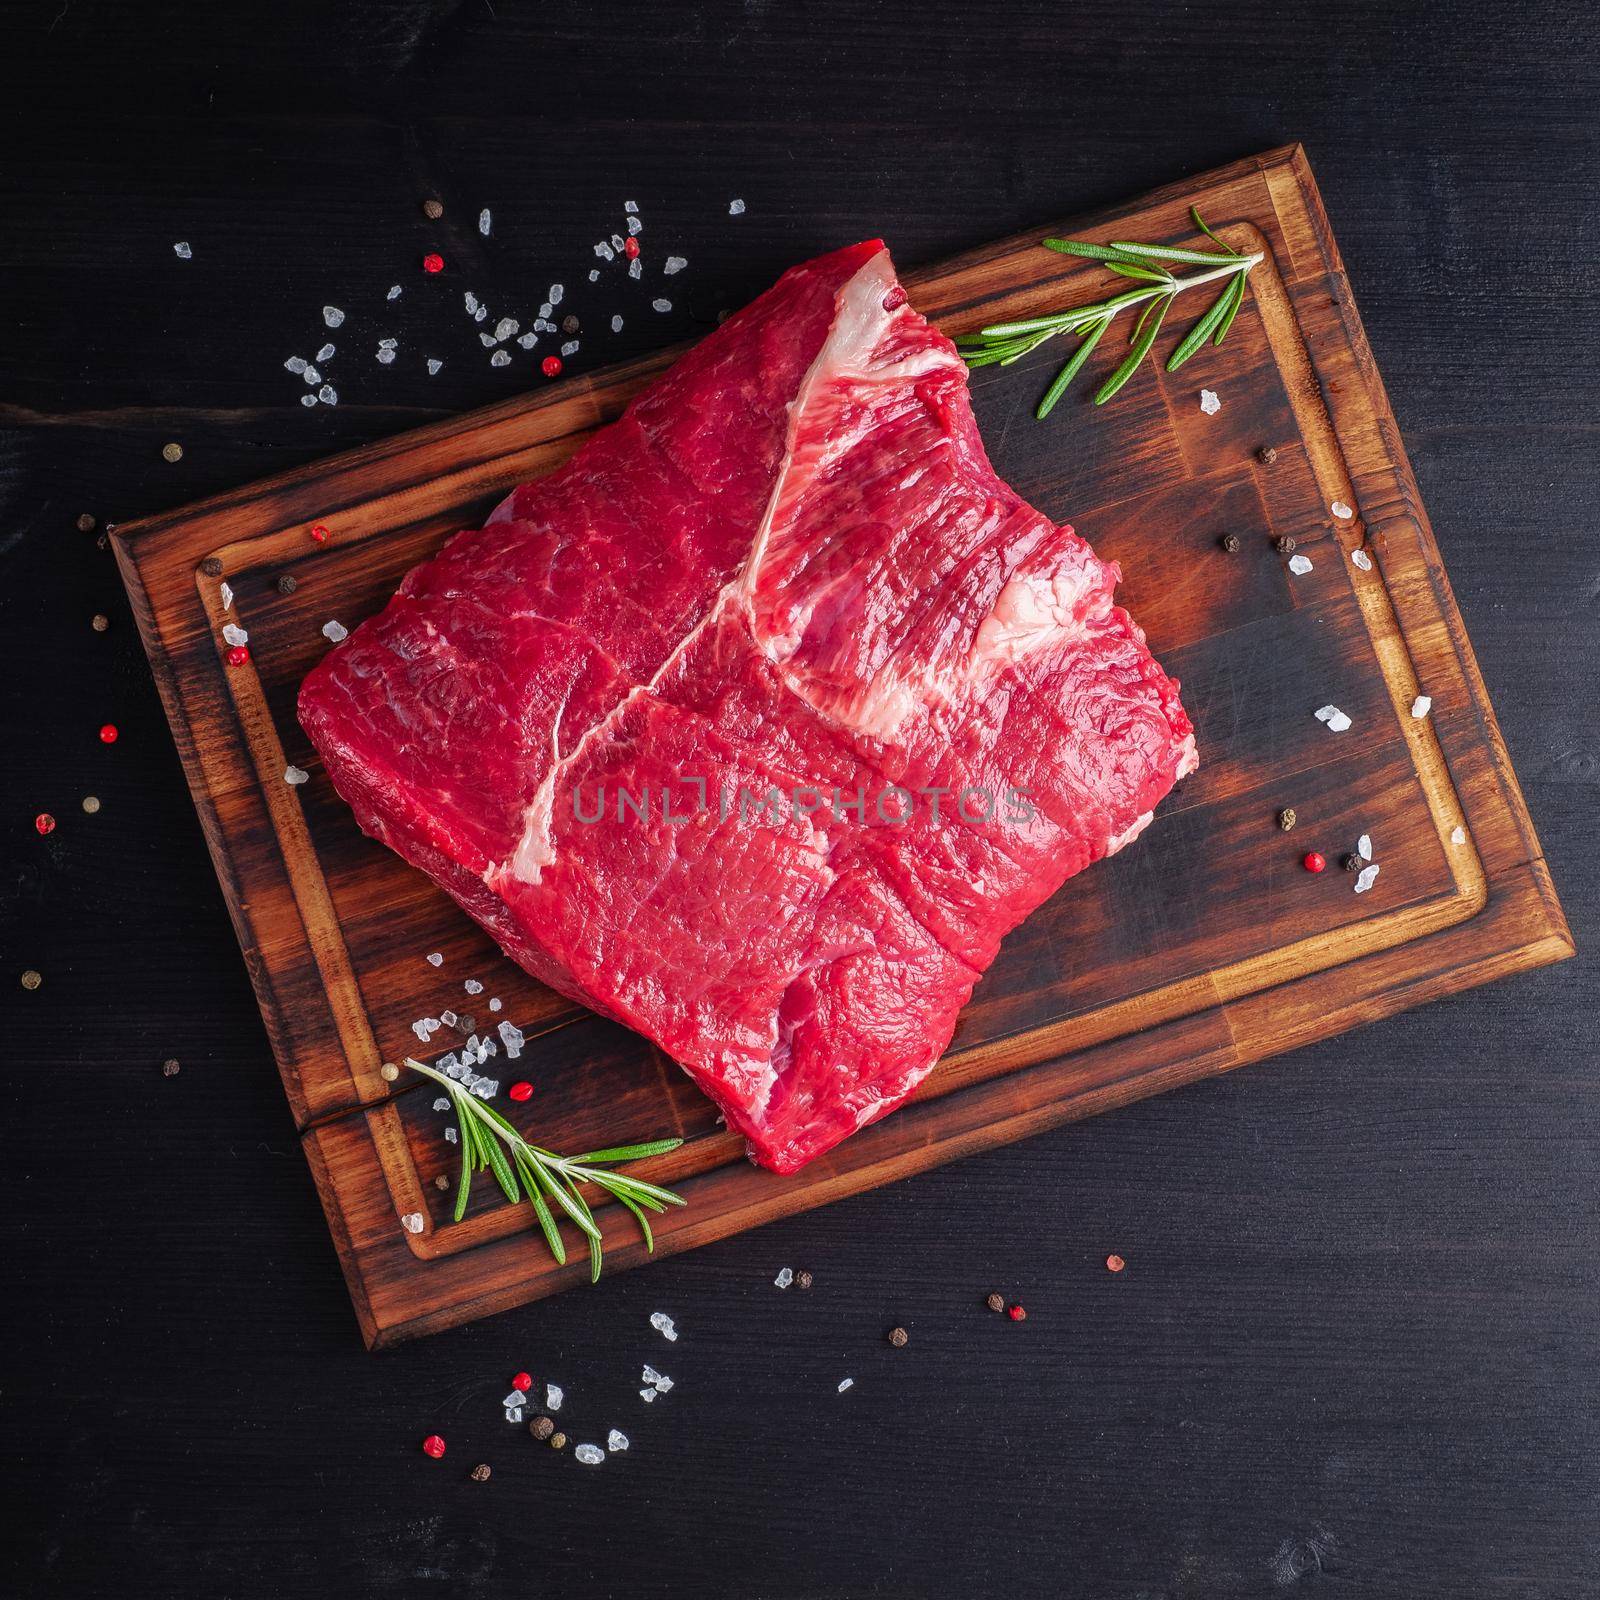 Raw meat, beef steak with seasoning on chopping board on dark background with rosemary, by NataBene